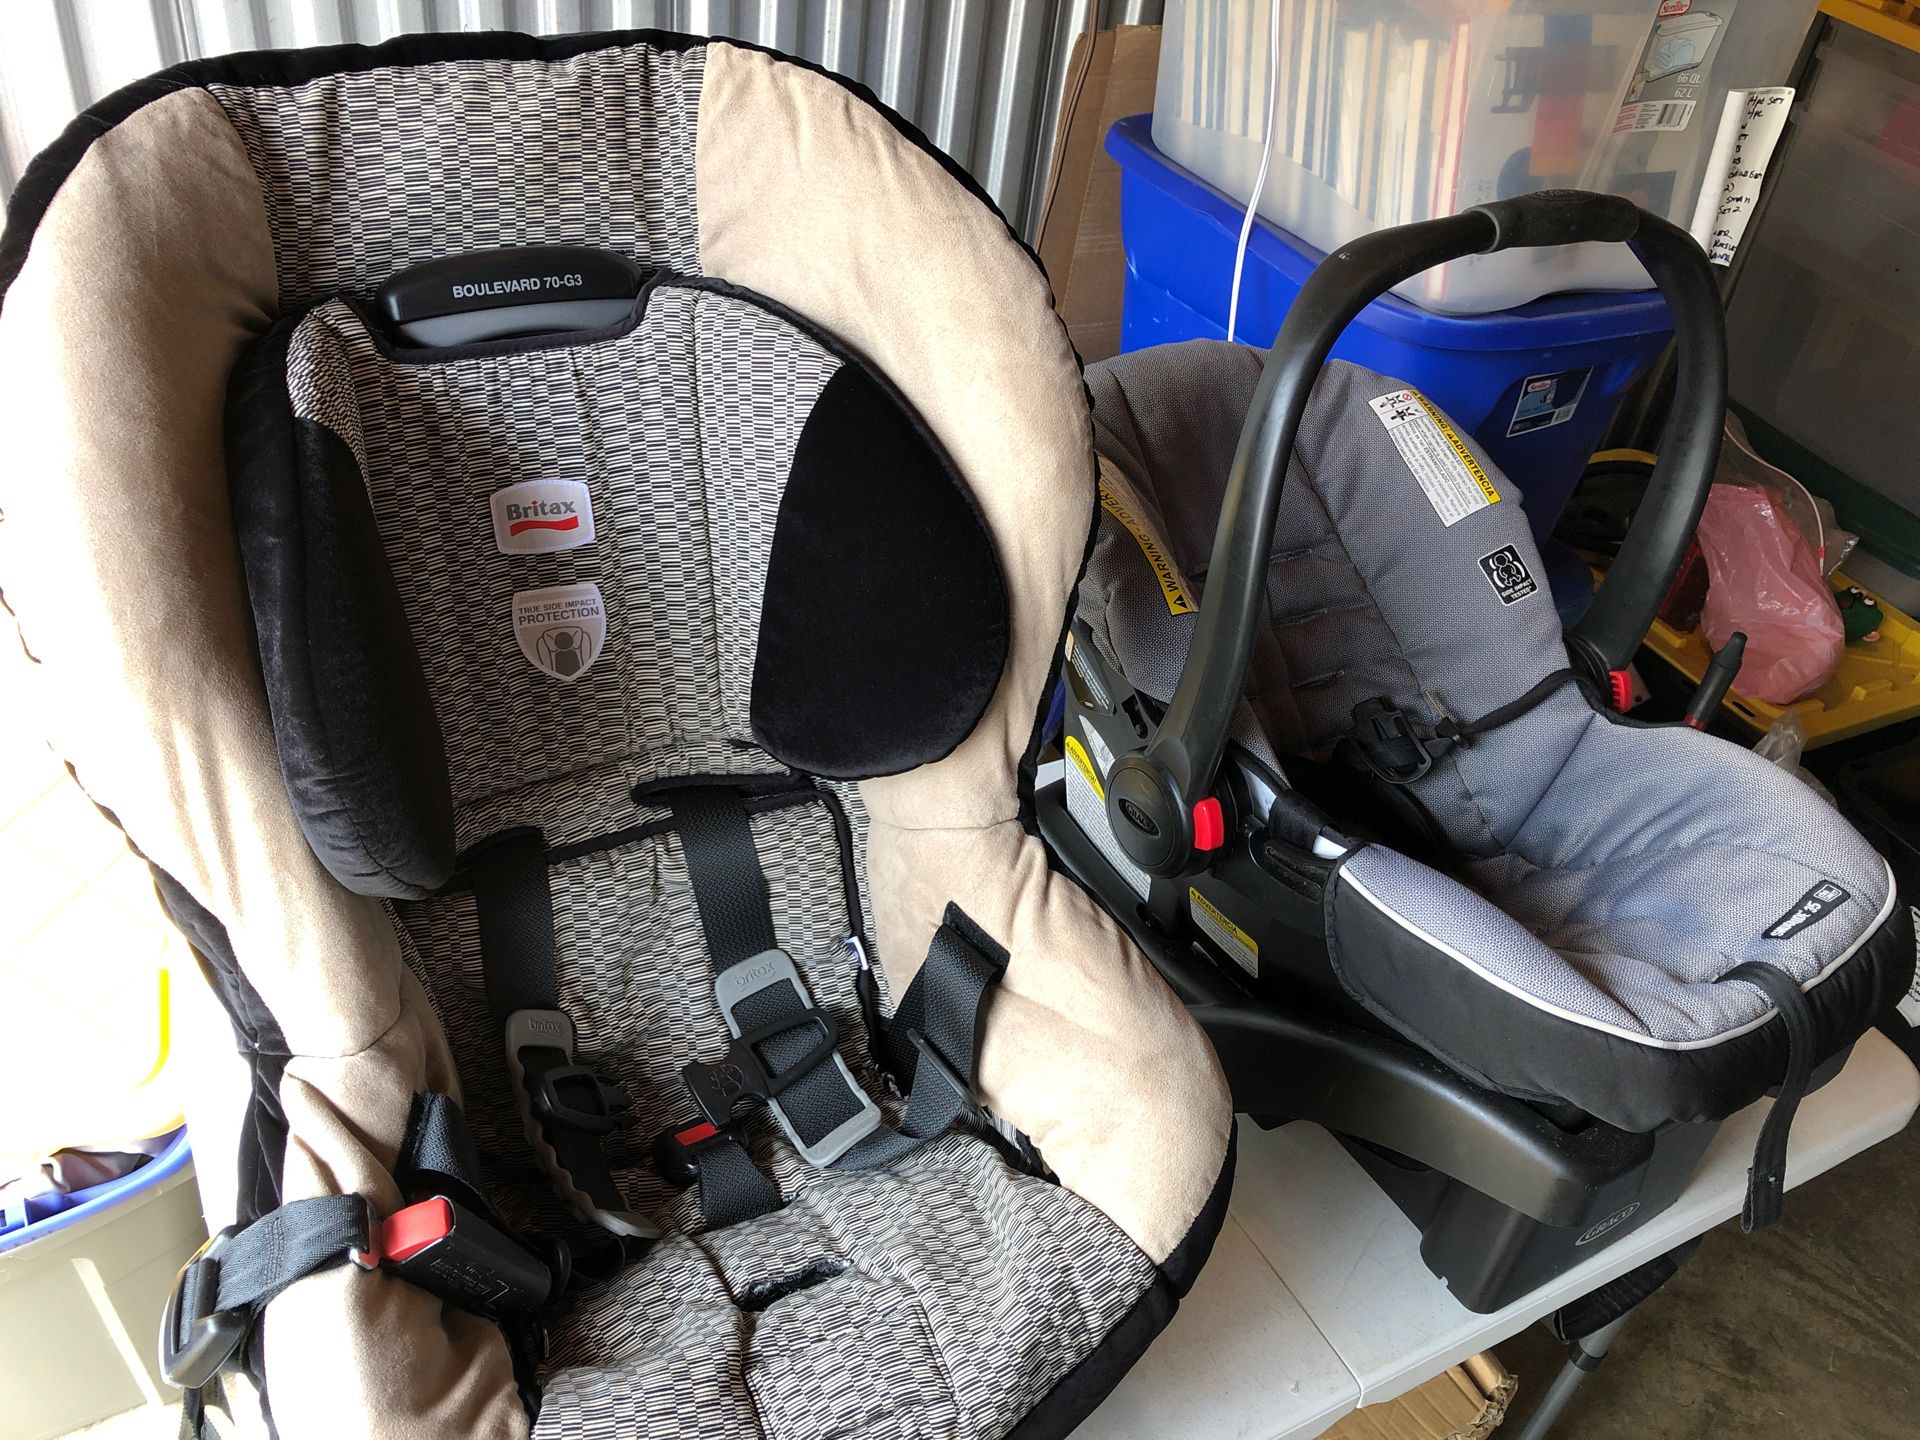 Baby car seats (2) good condition. Britax and Snugride